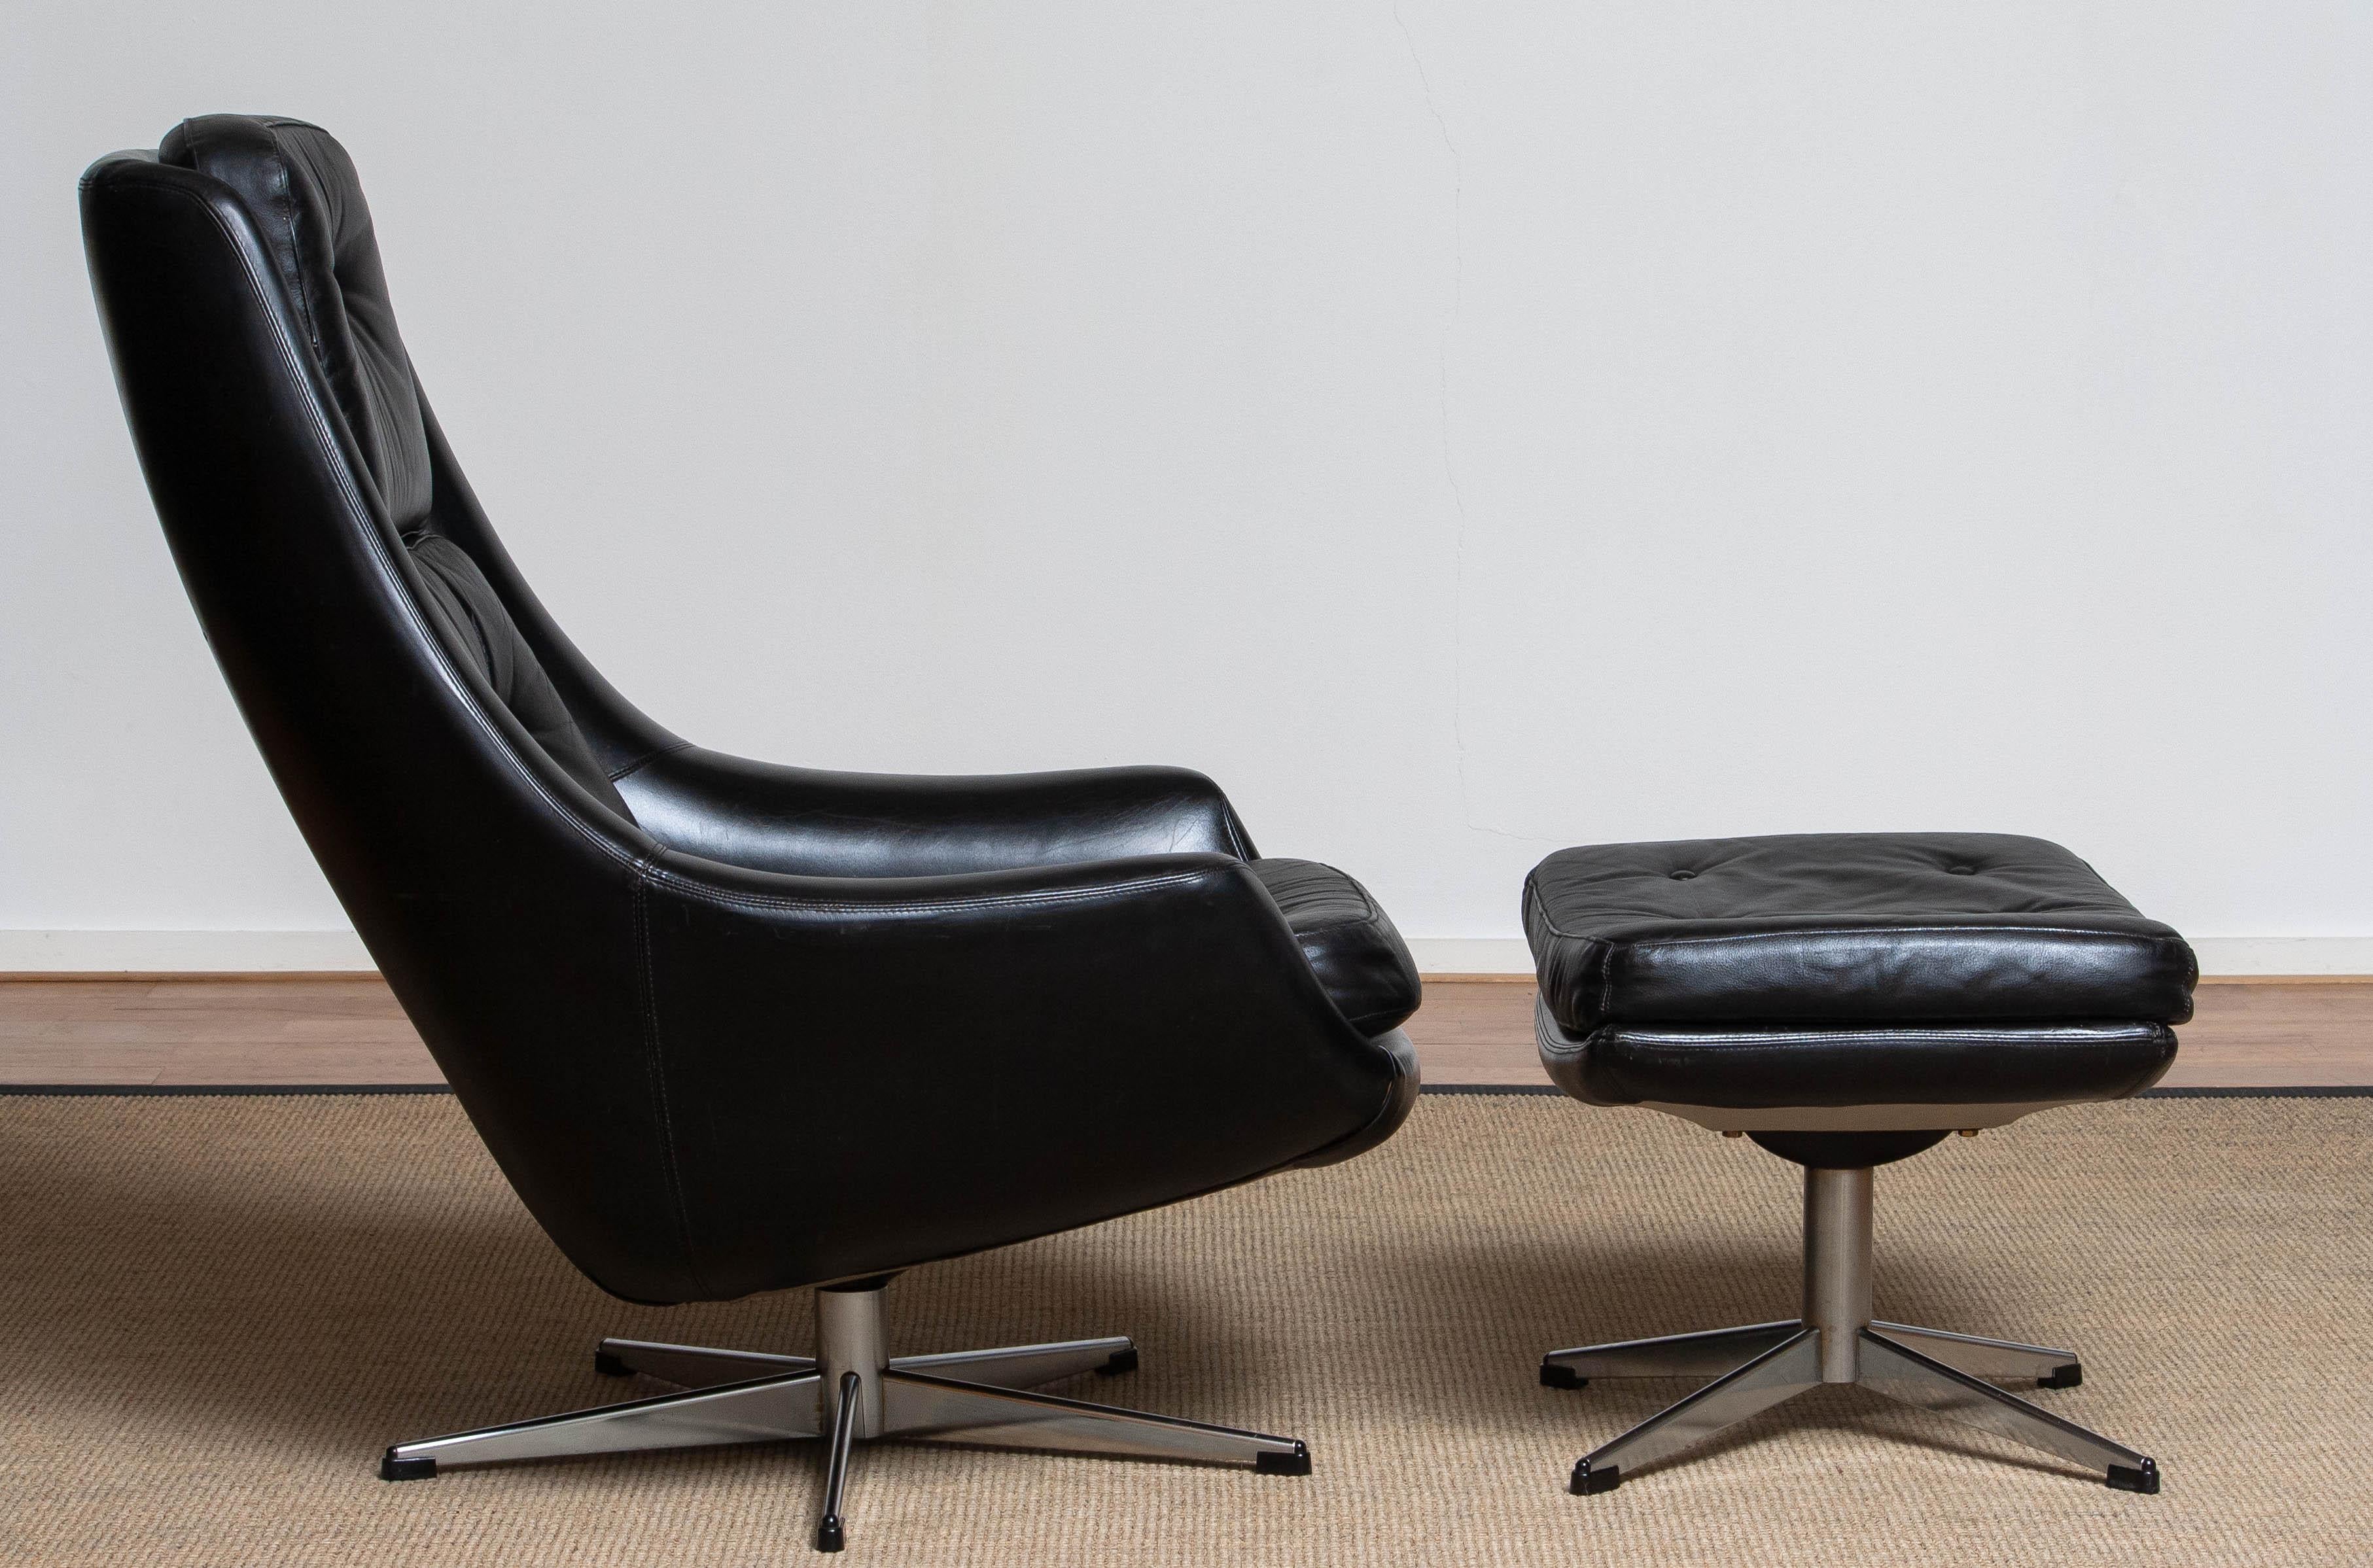 Mid-20th Century 1960s Black Leather Swivel Chair with Matching Ottoman by H.W. Klein for Bramin